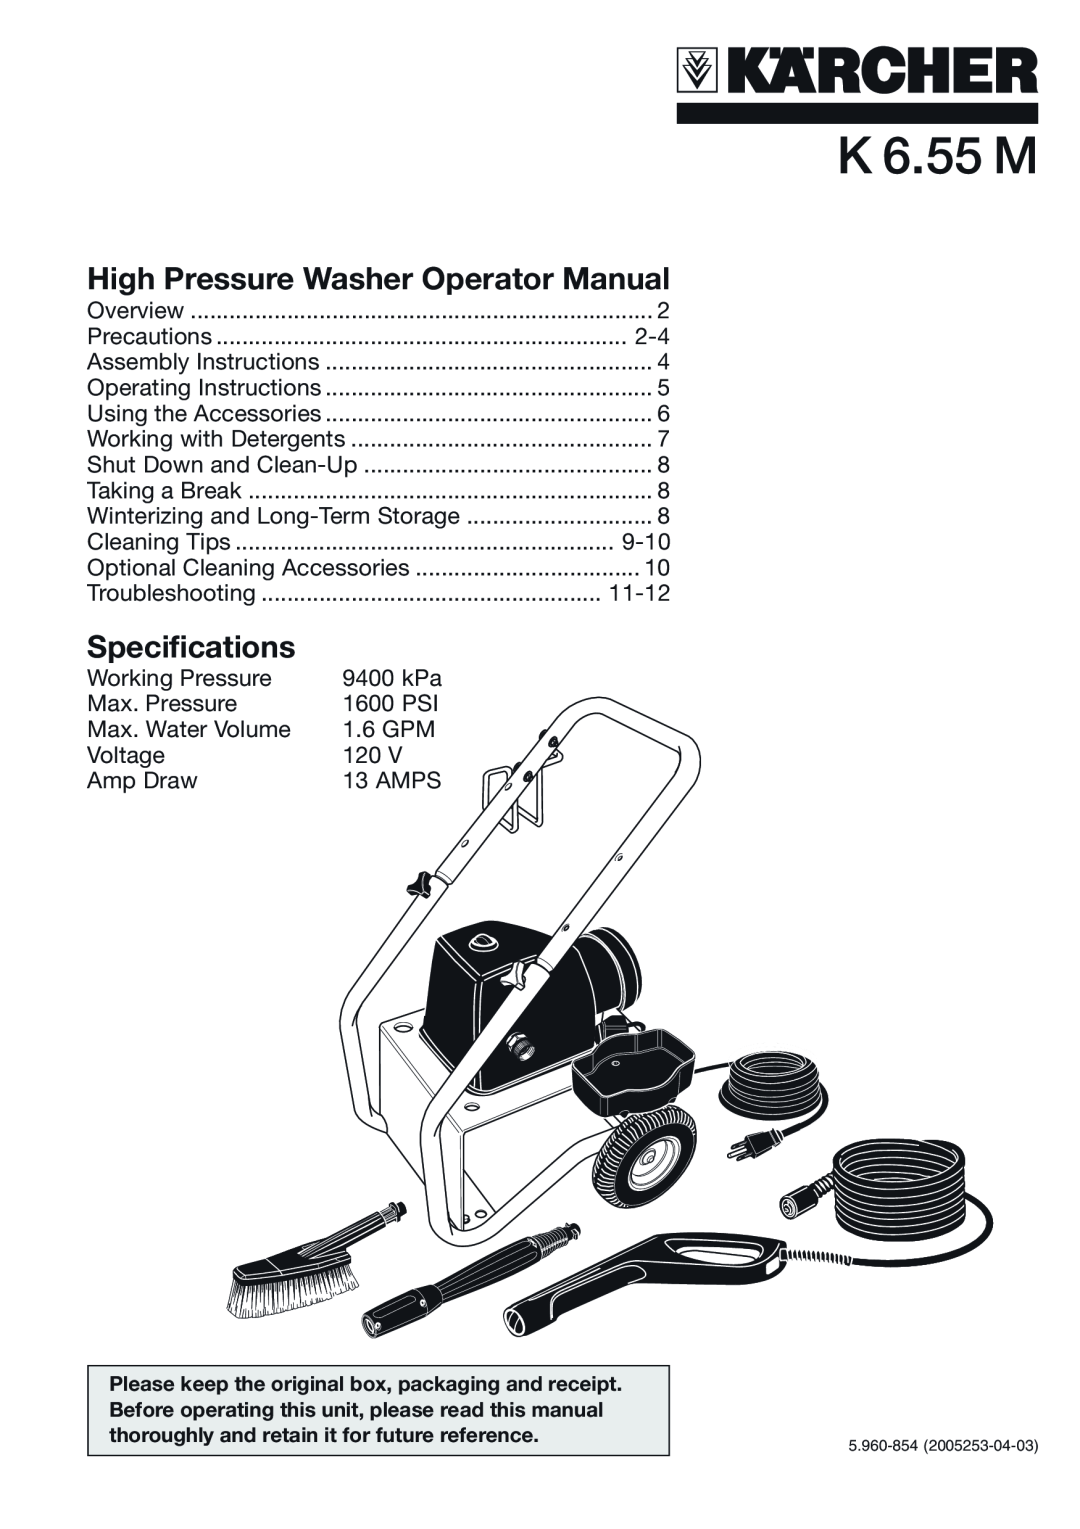 Karcher K 6.55 M specifications High Pressure Washer Operator Manual, Specifications 